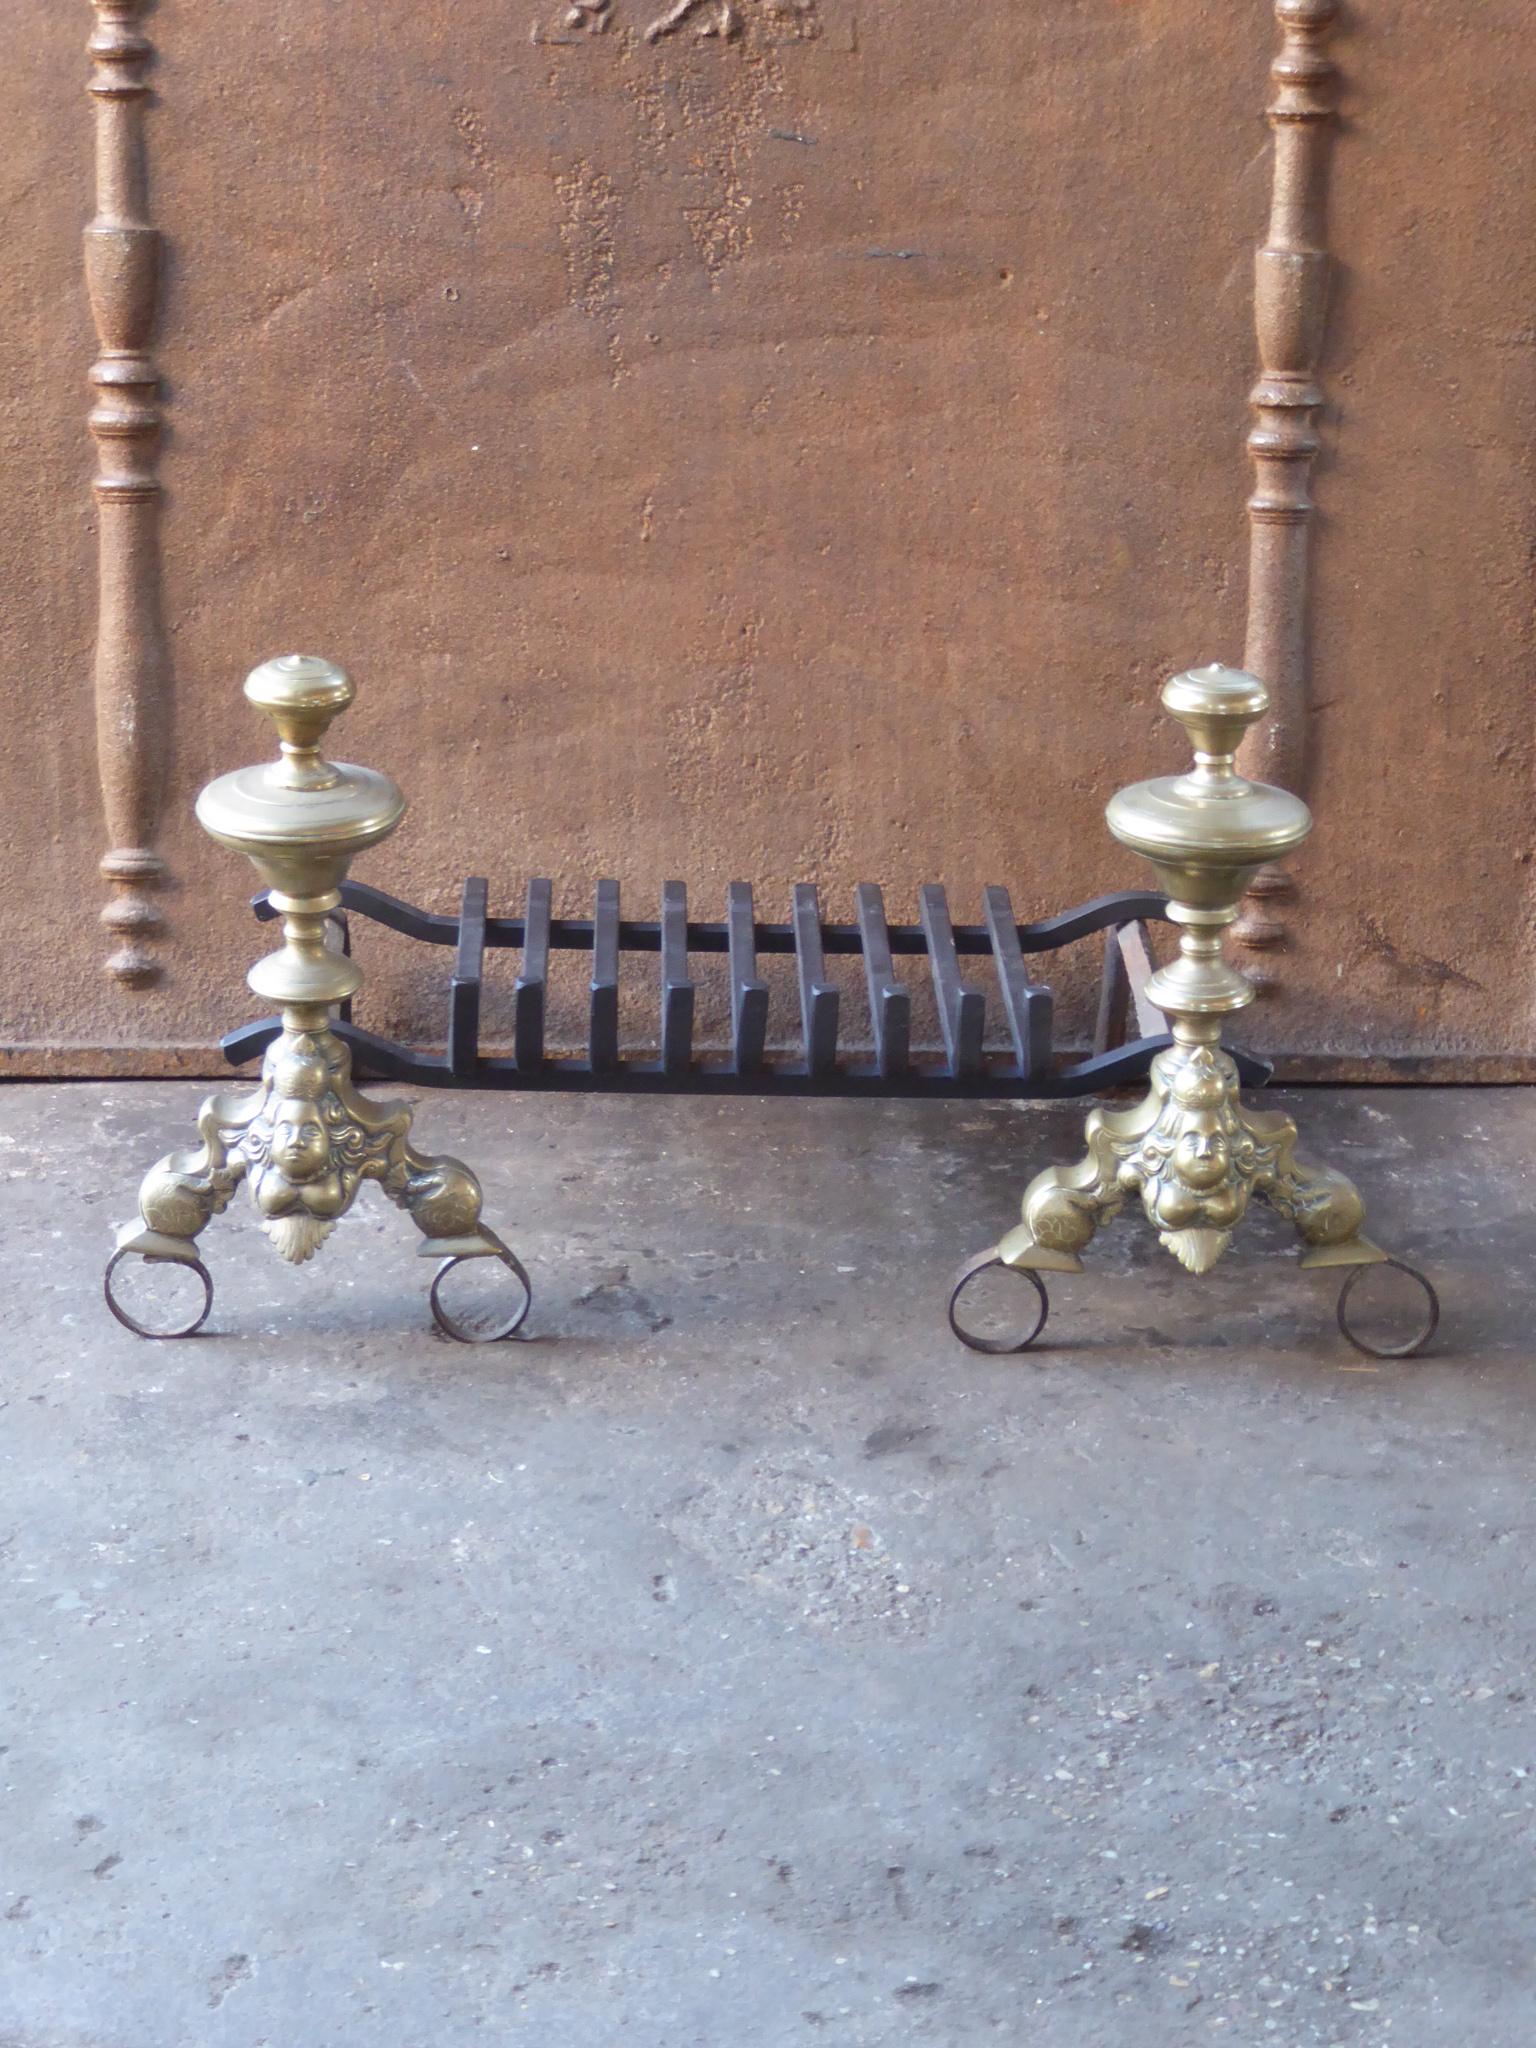 17th century French Louis XIV period fireplace basket - fire basket made of bronze and wrought iron. The total width of the front of the grate is 75 cm (29.5 inch).

The basket is in a good condition and is fully functional.